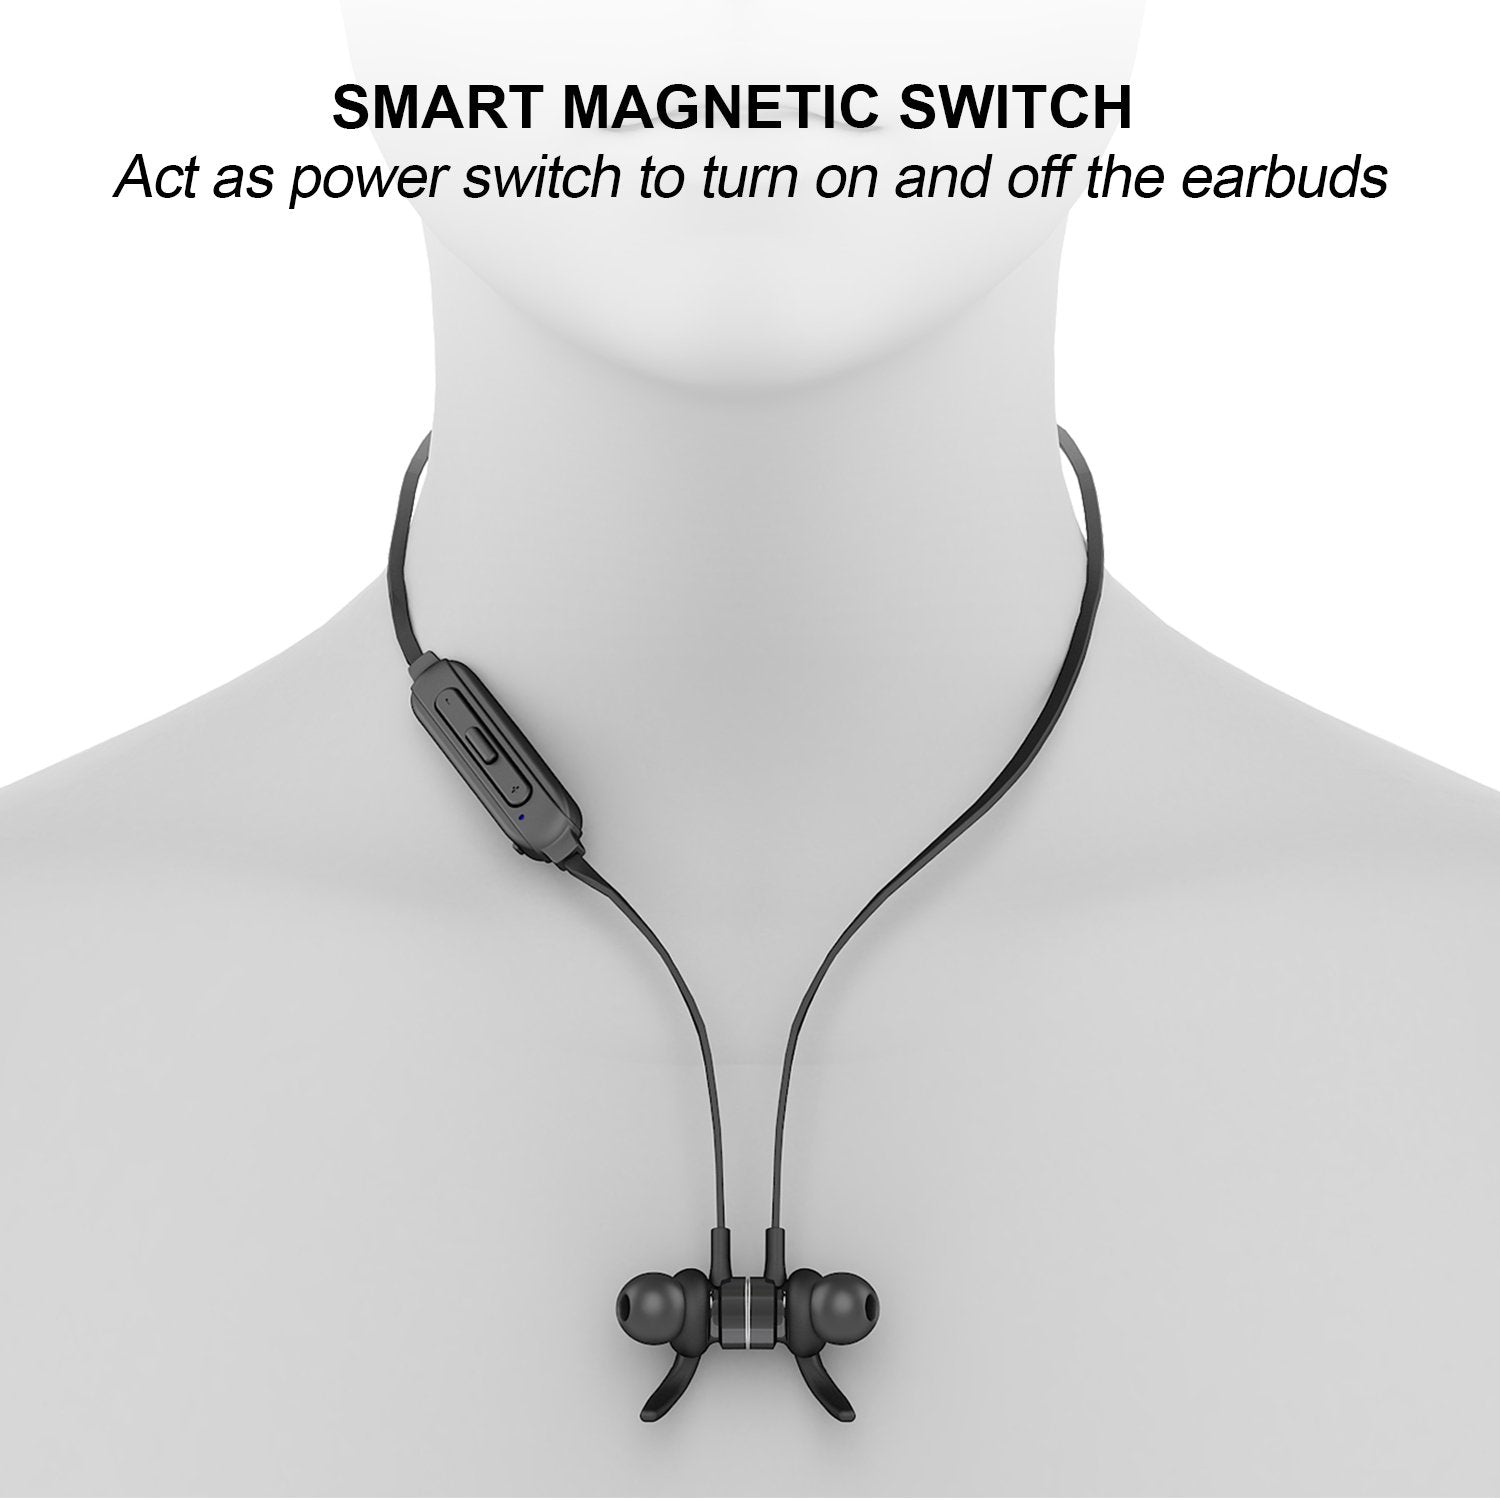 MAG – Bluetooth Stereo Earphones with Smart Magnetic Switch System Plus Remote Shutter - Bluetooth Earphones - jabeesstore - jabeesstore